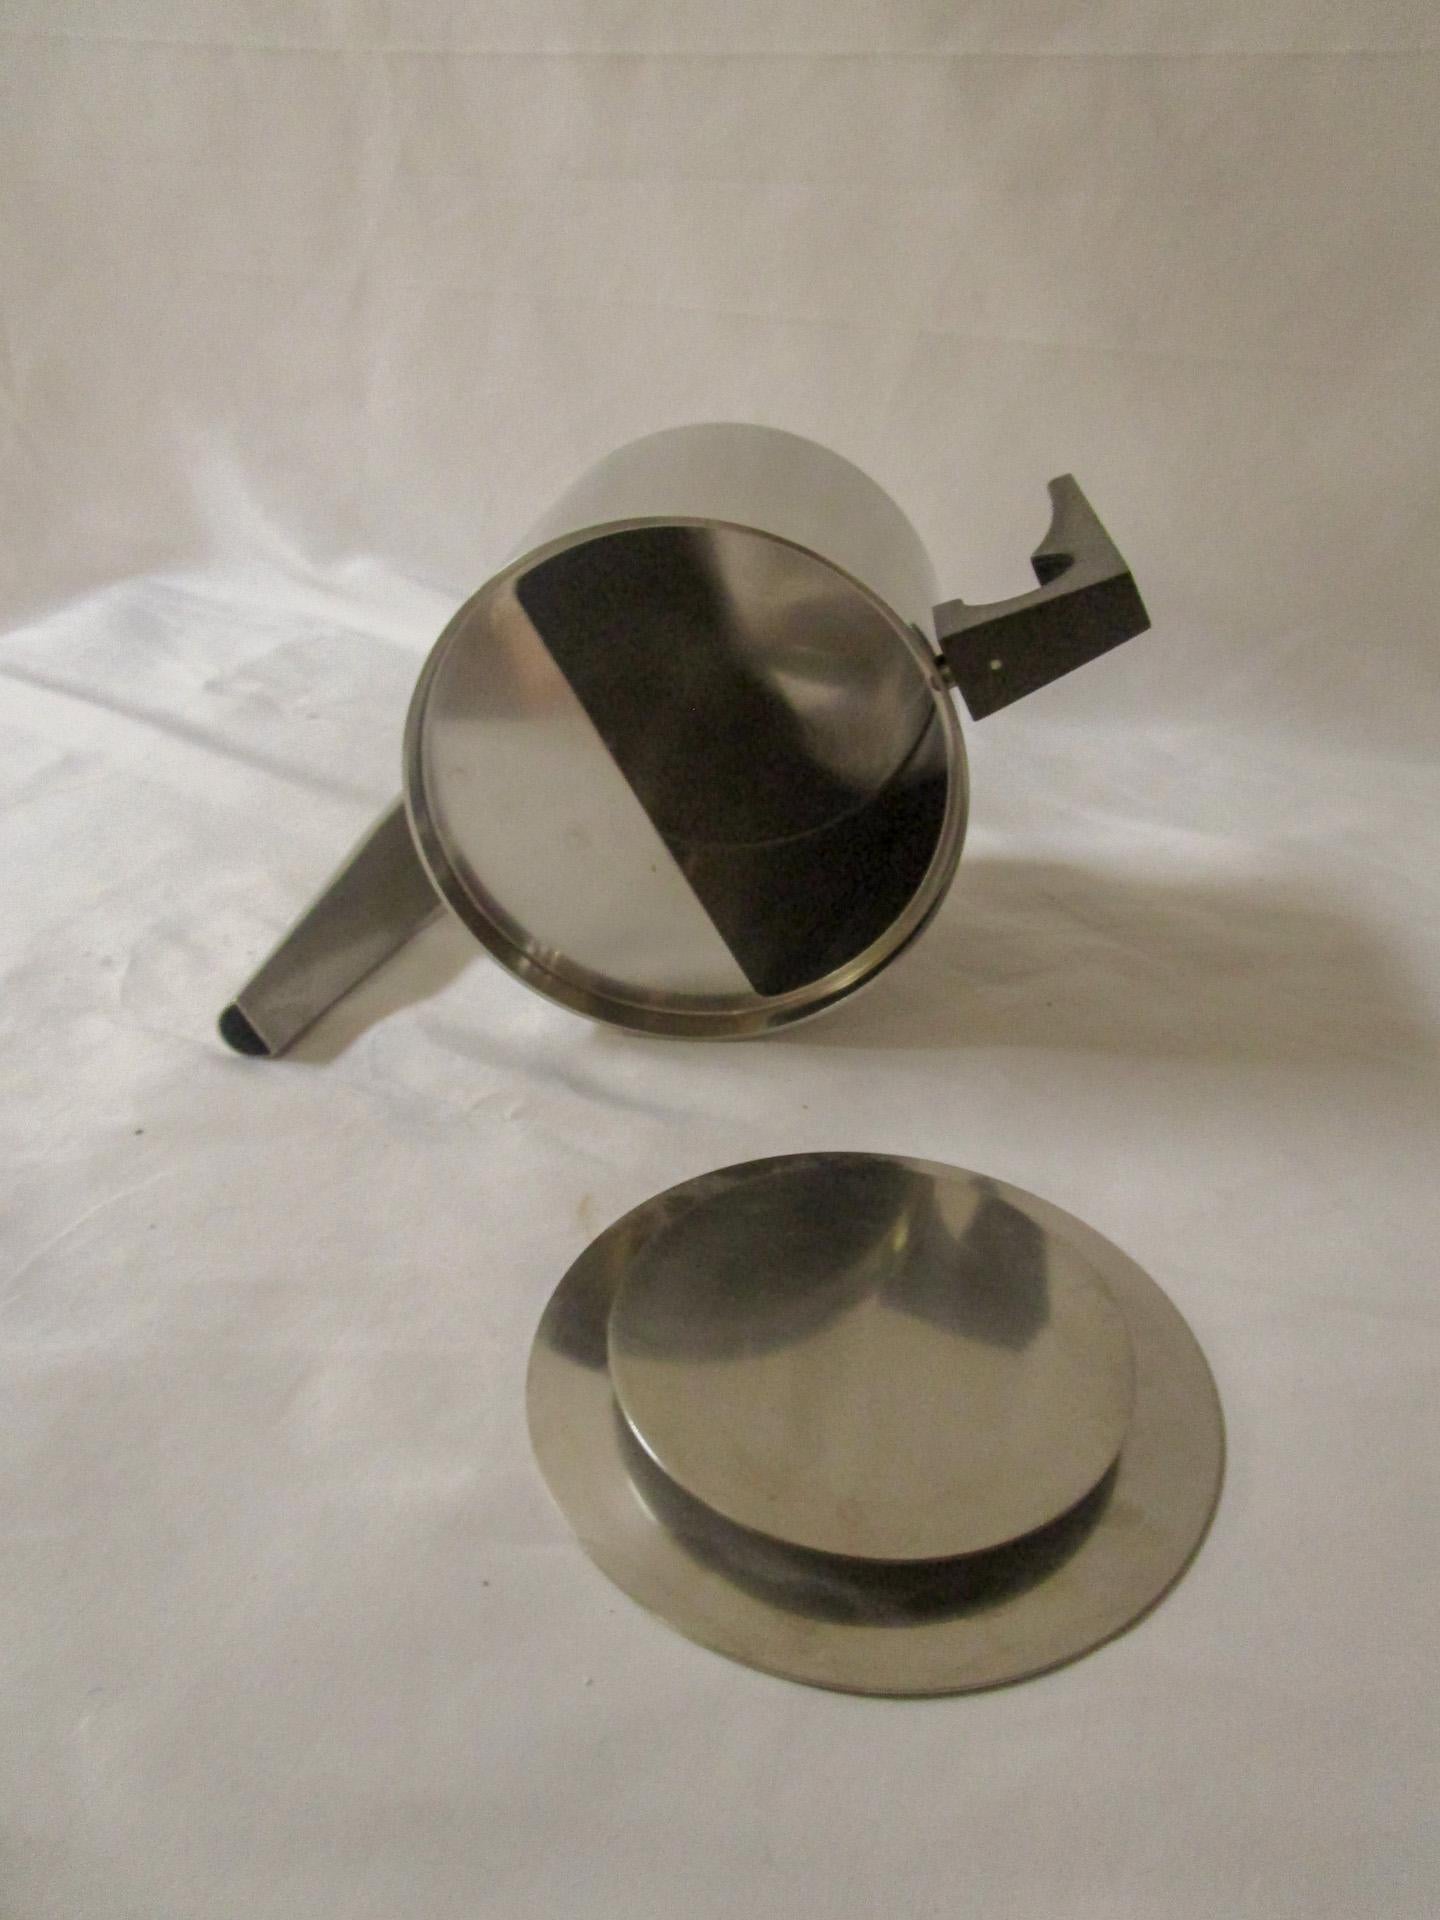 Mid-Century Modern Stainless Steel Tea Service by Arne Jacobsen for Stelton In Good Condition For Sale In Savannah, GA